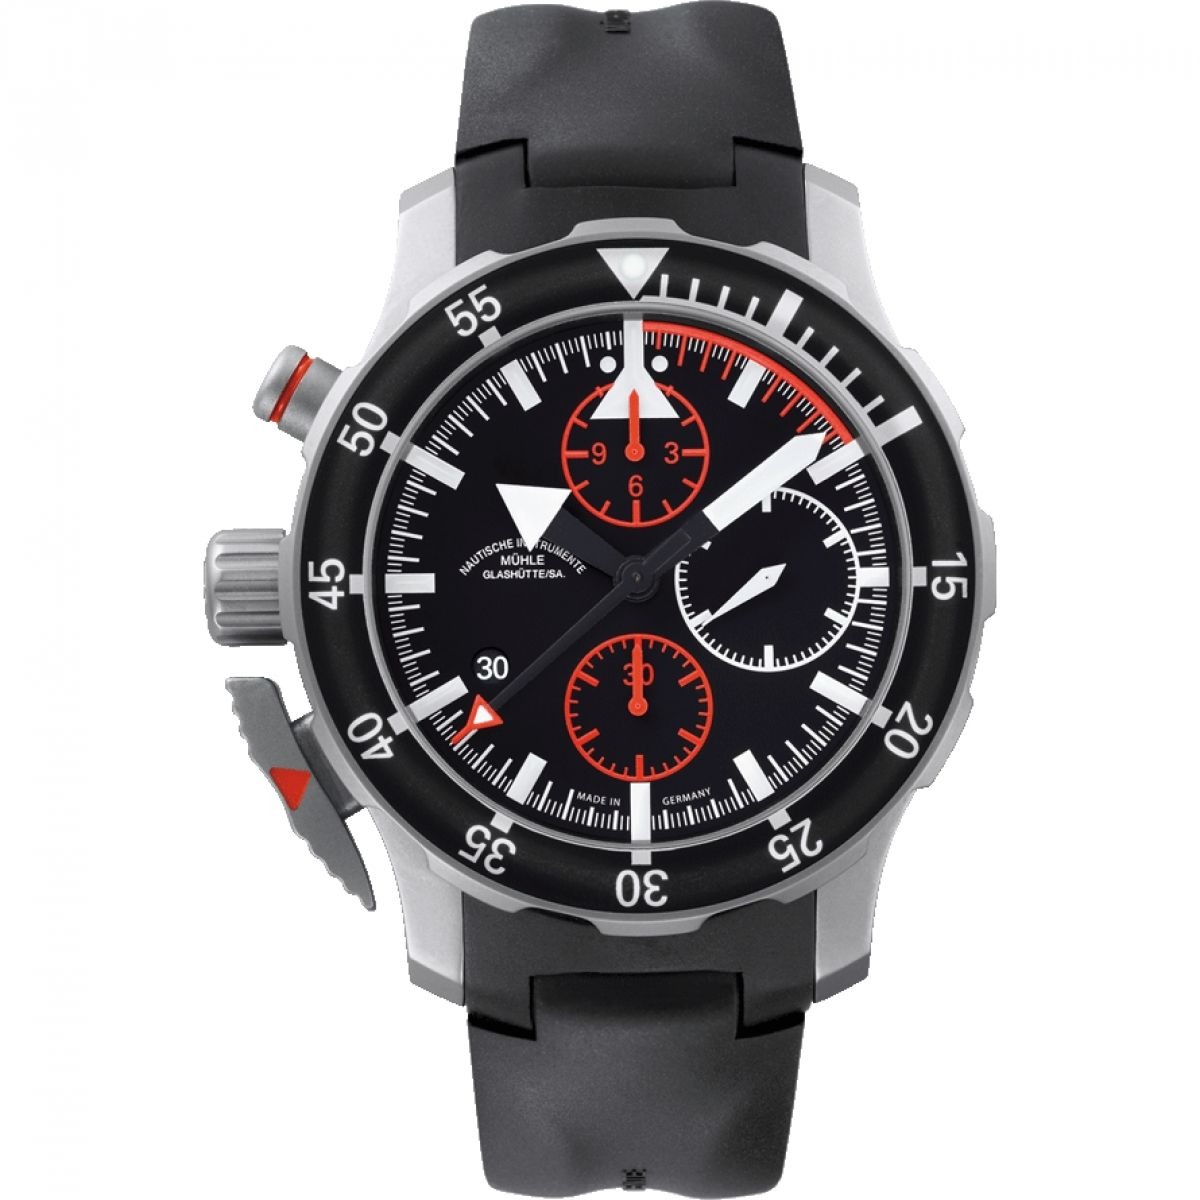 Watch Shop - Chronograph Watch Black for Men from Muhle Glashutte GOOFASH